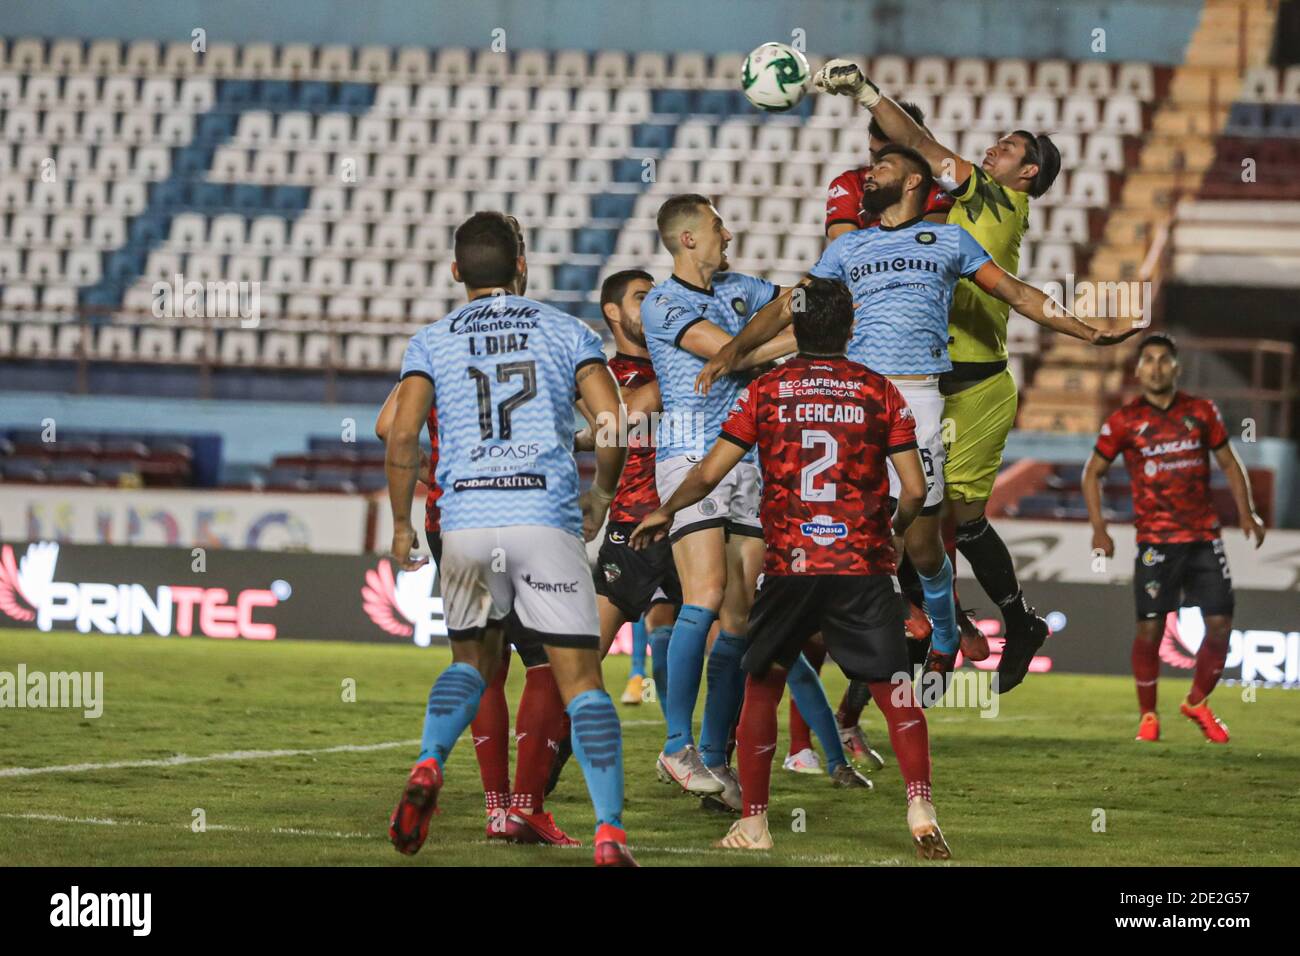 Cancun, Mexico. 26th Nov, 2020. CANCUN, MEXICO - NOVEMBER 26: Octavio Paz  of Cancun FC in action during the match of Guard1anes 2020 Reclassification  Tournament between Cancun FC and Tlaxcala FC as